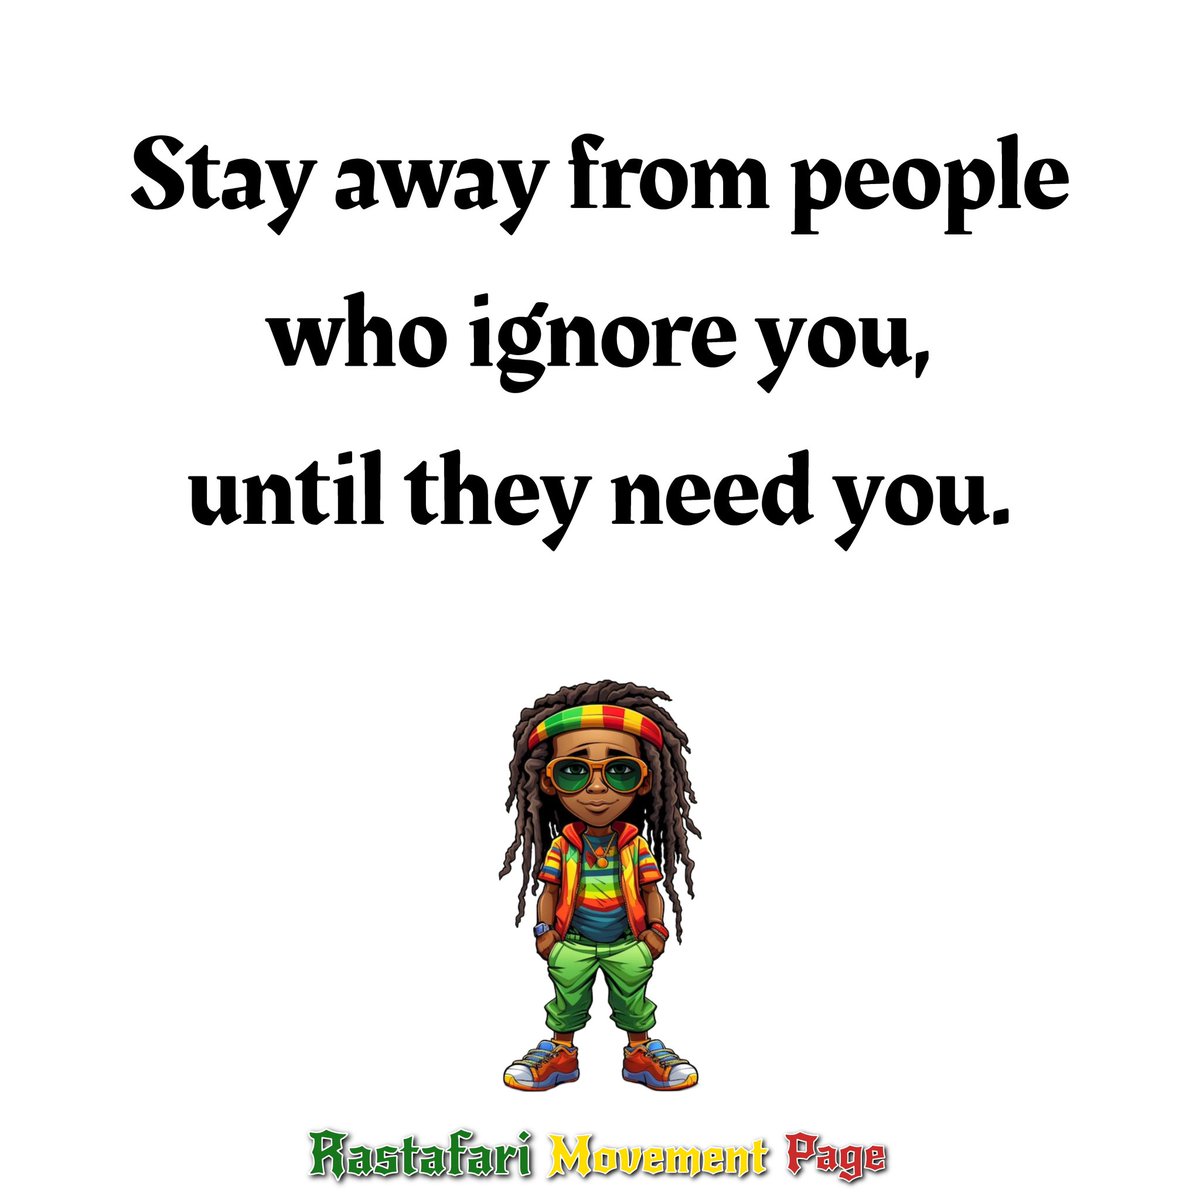 Stay away from people who ignore you, until they need you.